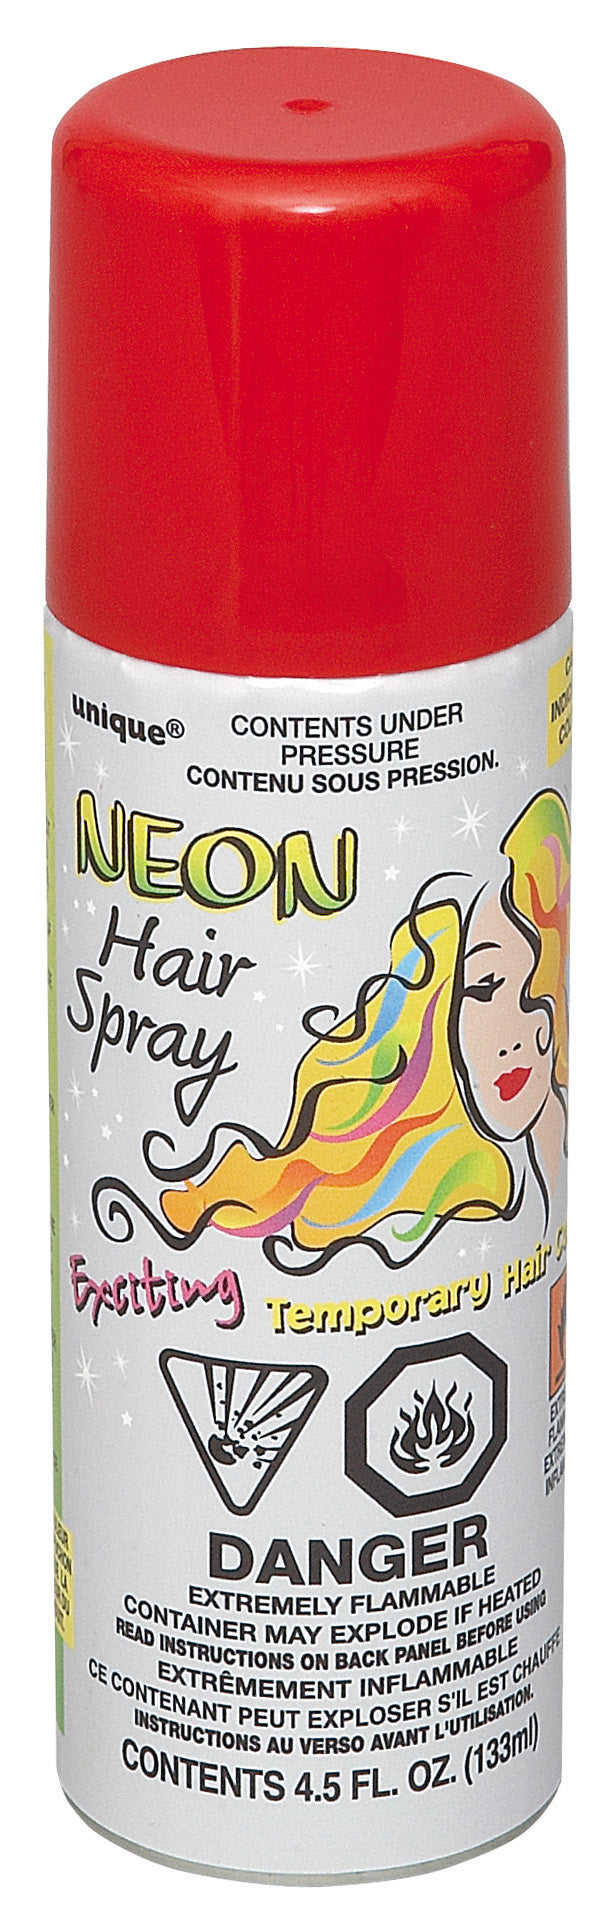 HAIR SPRAY - NEON RED Supplier: Meteor Party